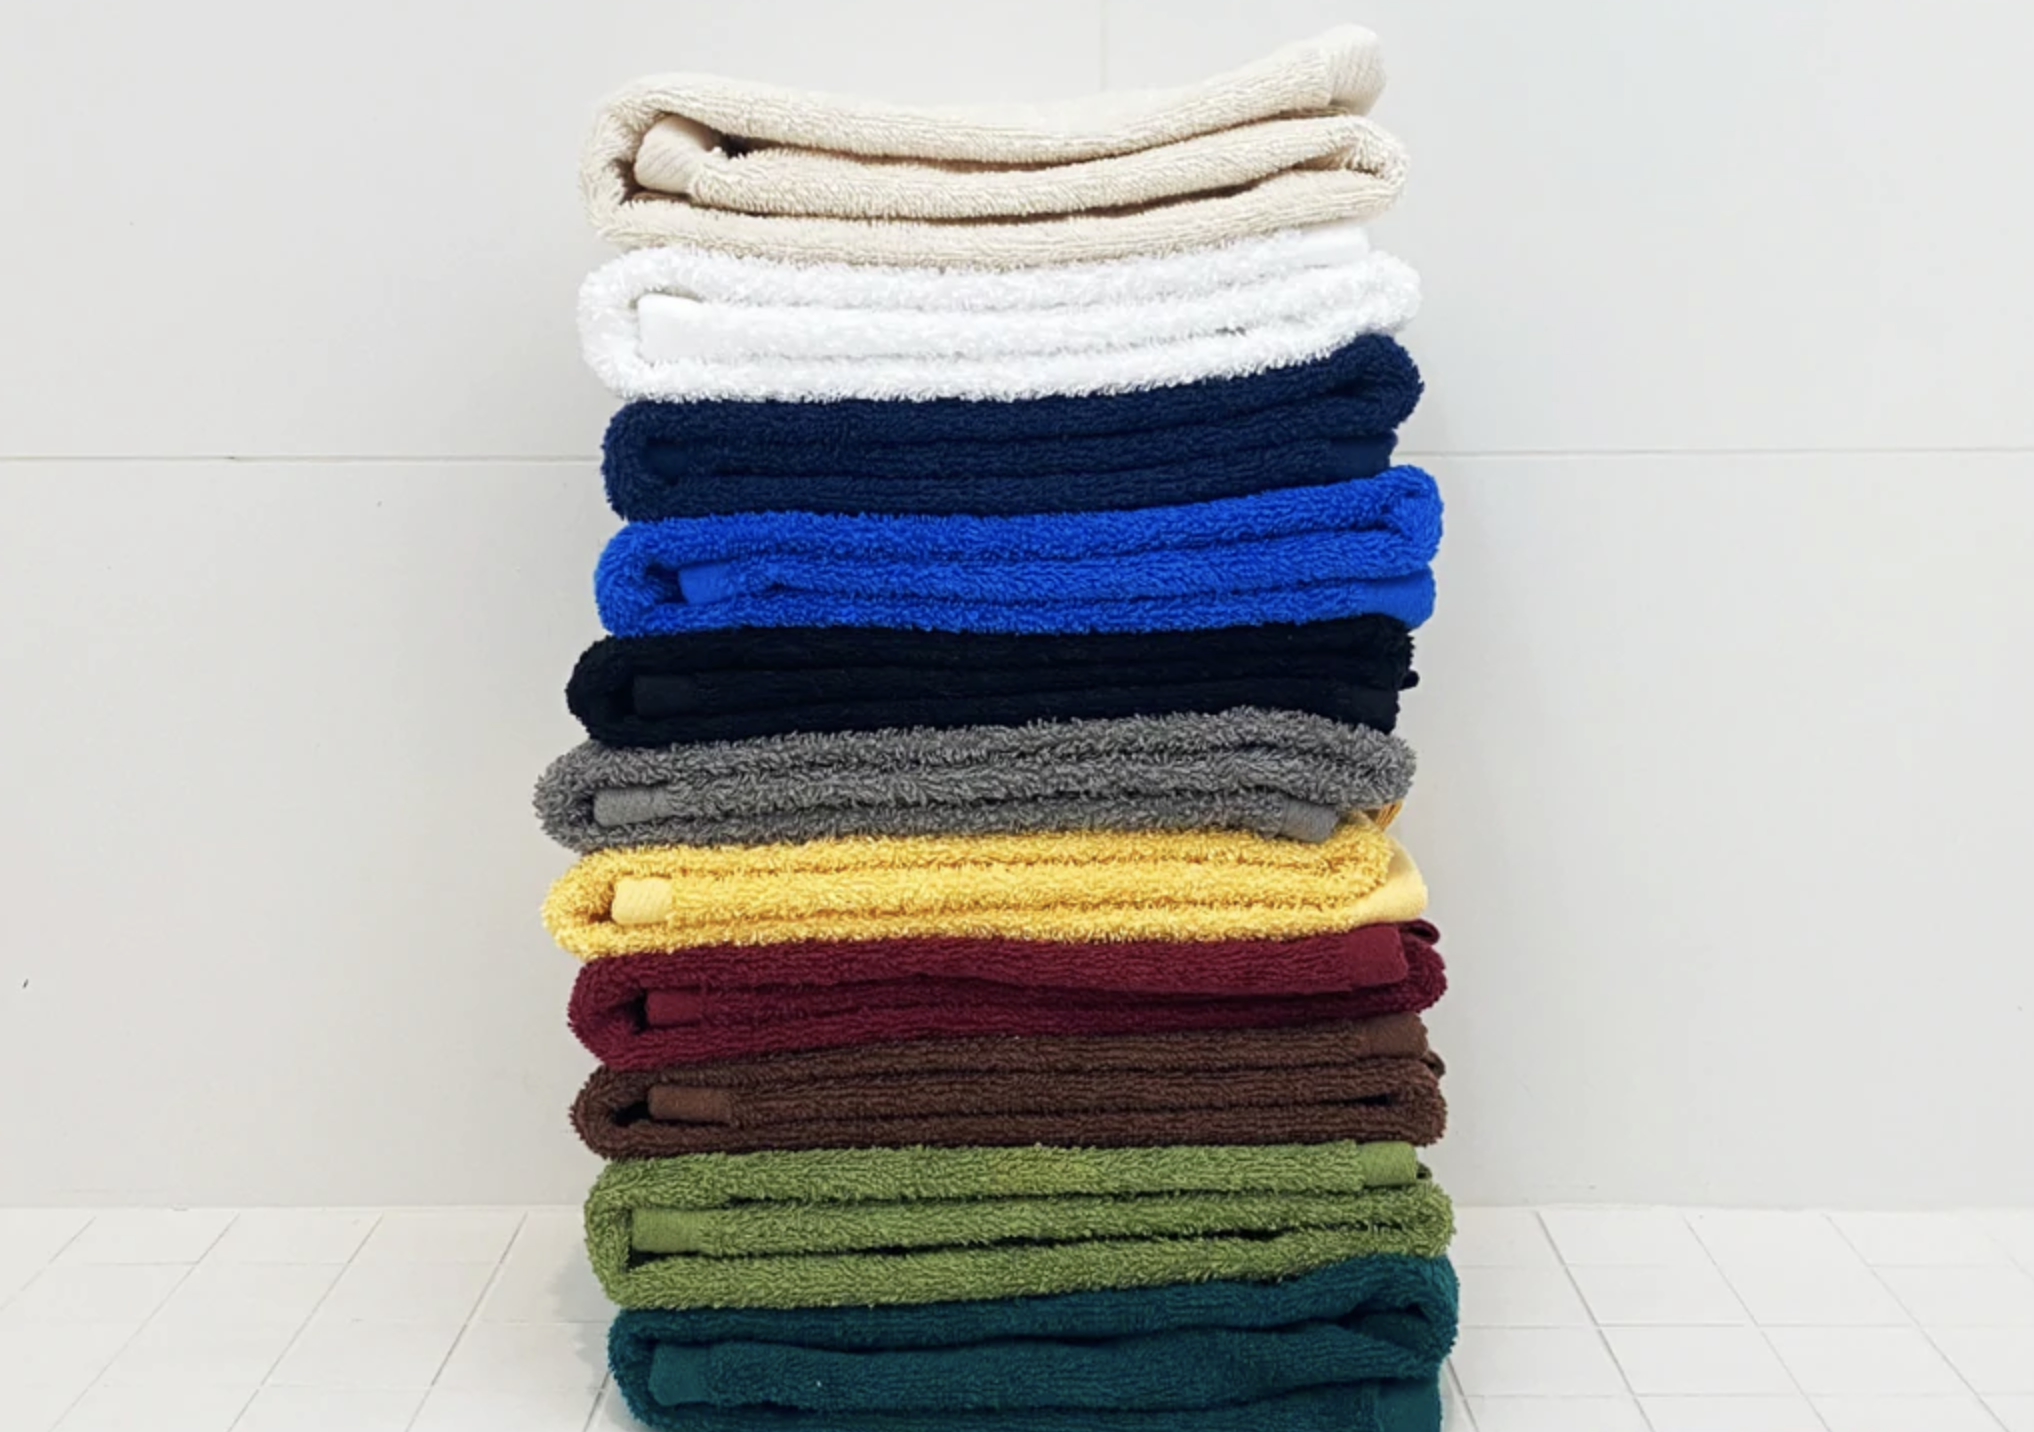 The towels in a variety of colors